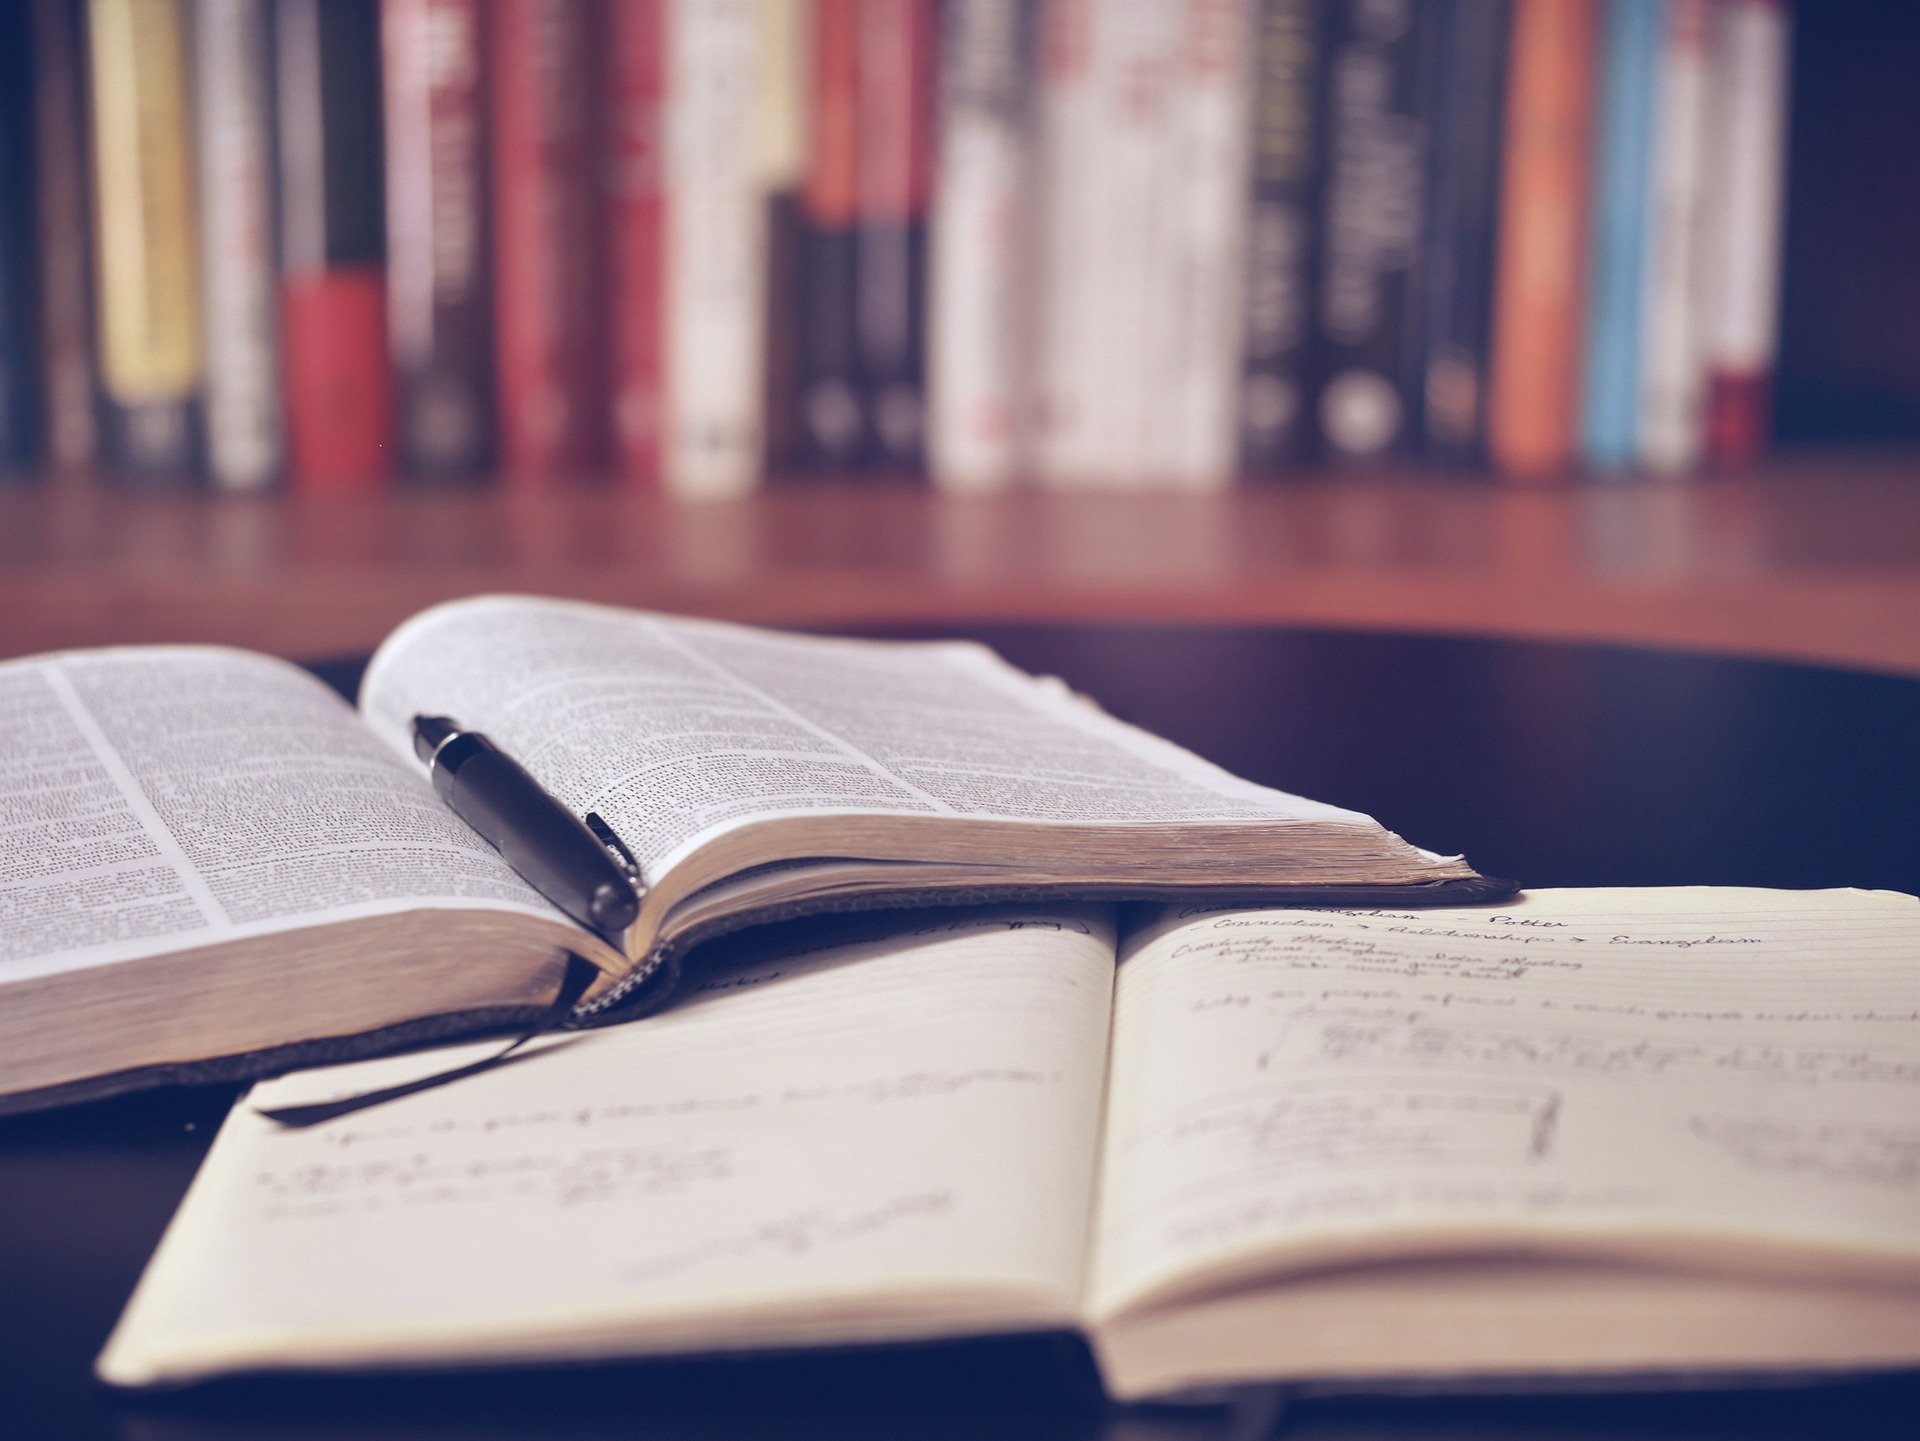 The books for studying | Shutterstock